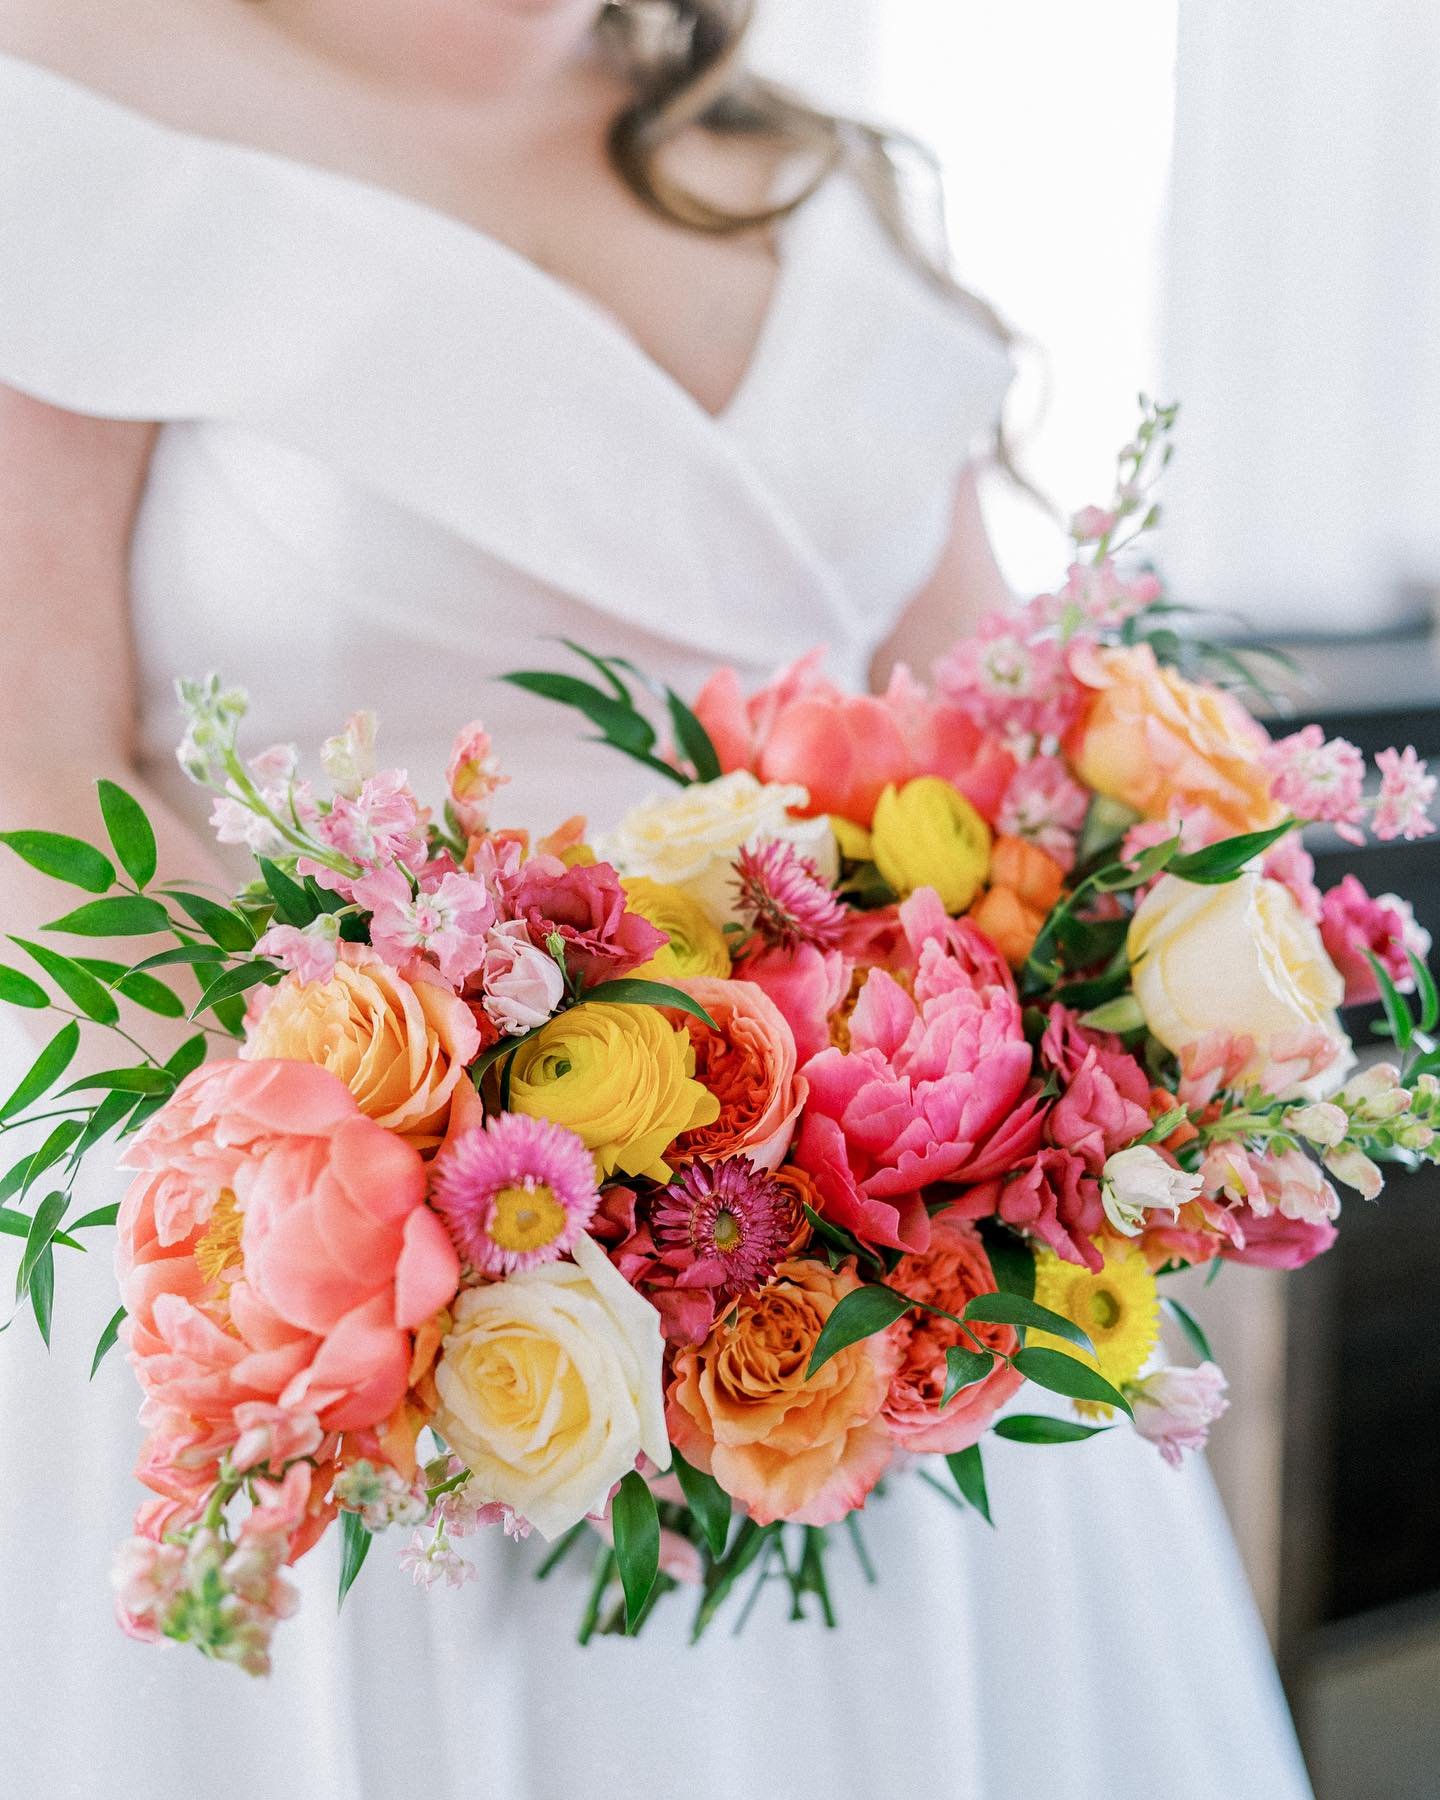 A sunset palette to remember 🌺 based on these bright blooms, you would never guess this was a late fall wedding! 

Venue: @birchwoodtn 
Planning: @christinaloganevents 
Photo: @kellilynnphotography 
Florals: @sunburstflorals 
Rentals: @southernevent